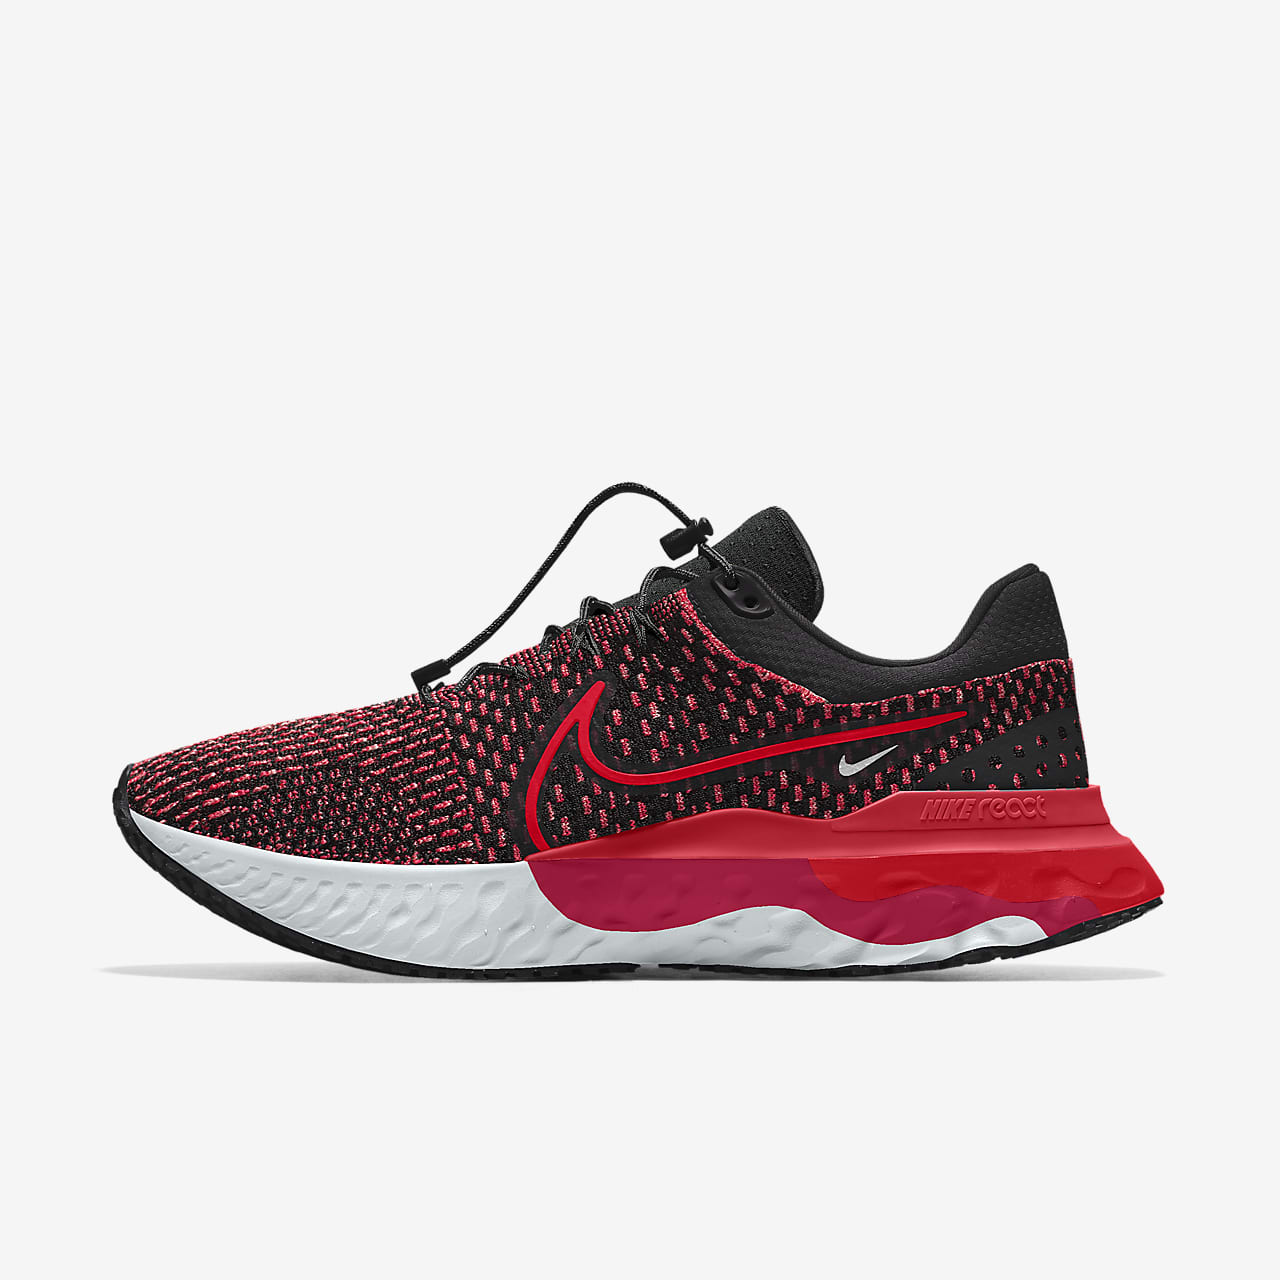 Chaussure de running sur route personnalisable Nike React Infinity Run Flyknit 3 By You pour Homme